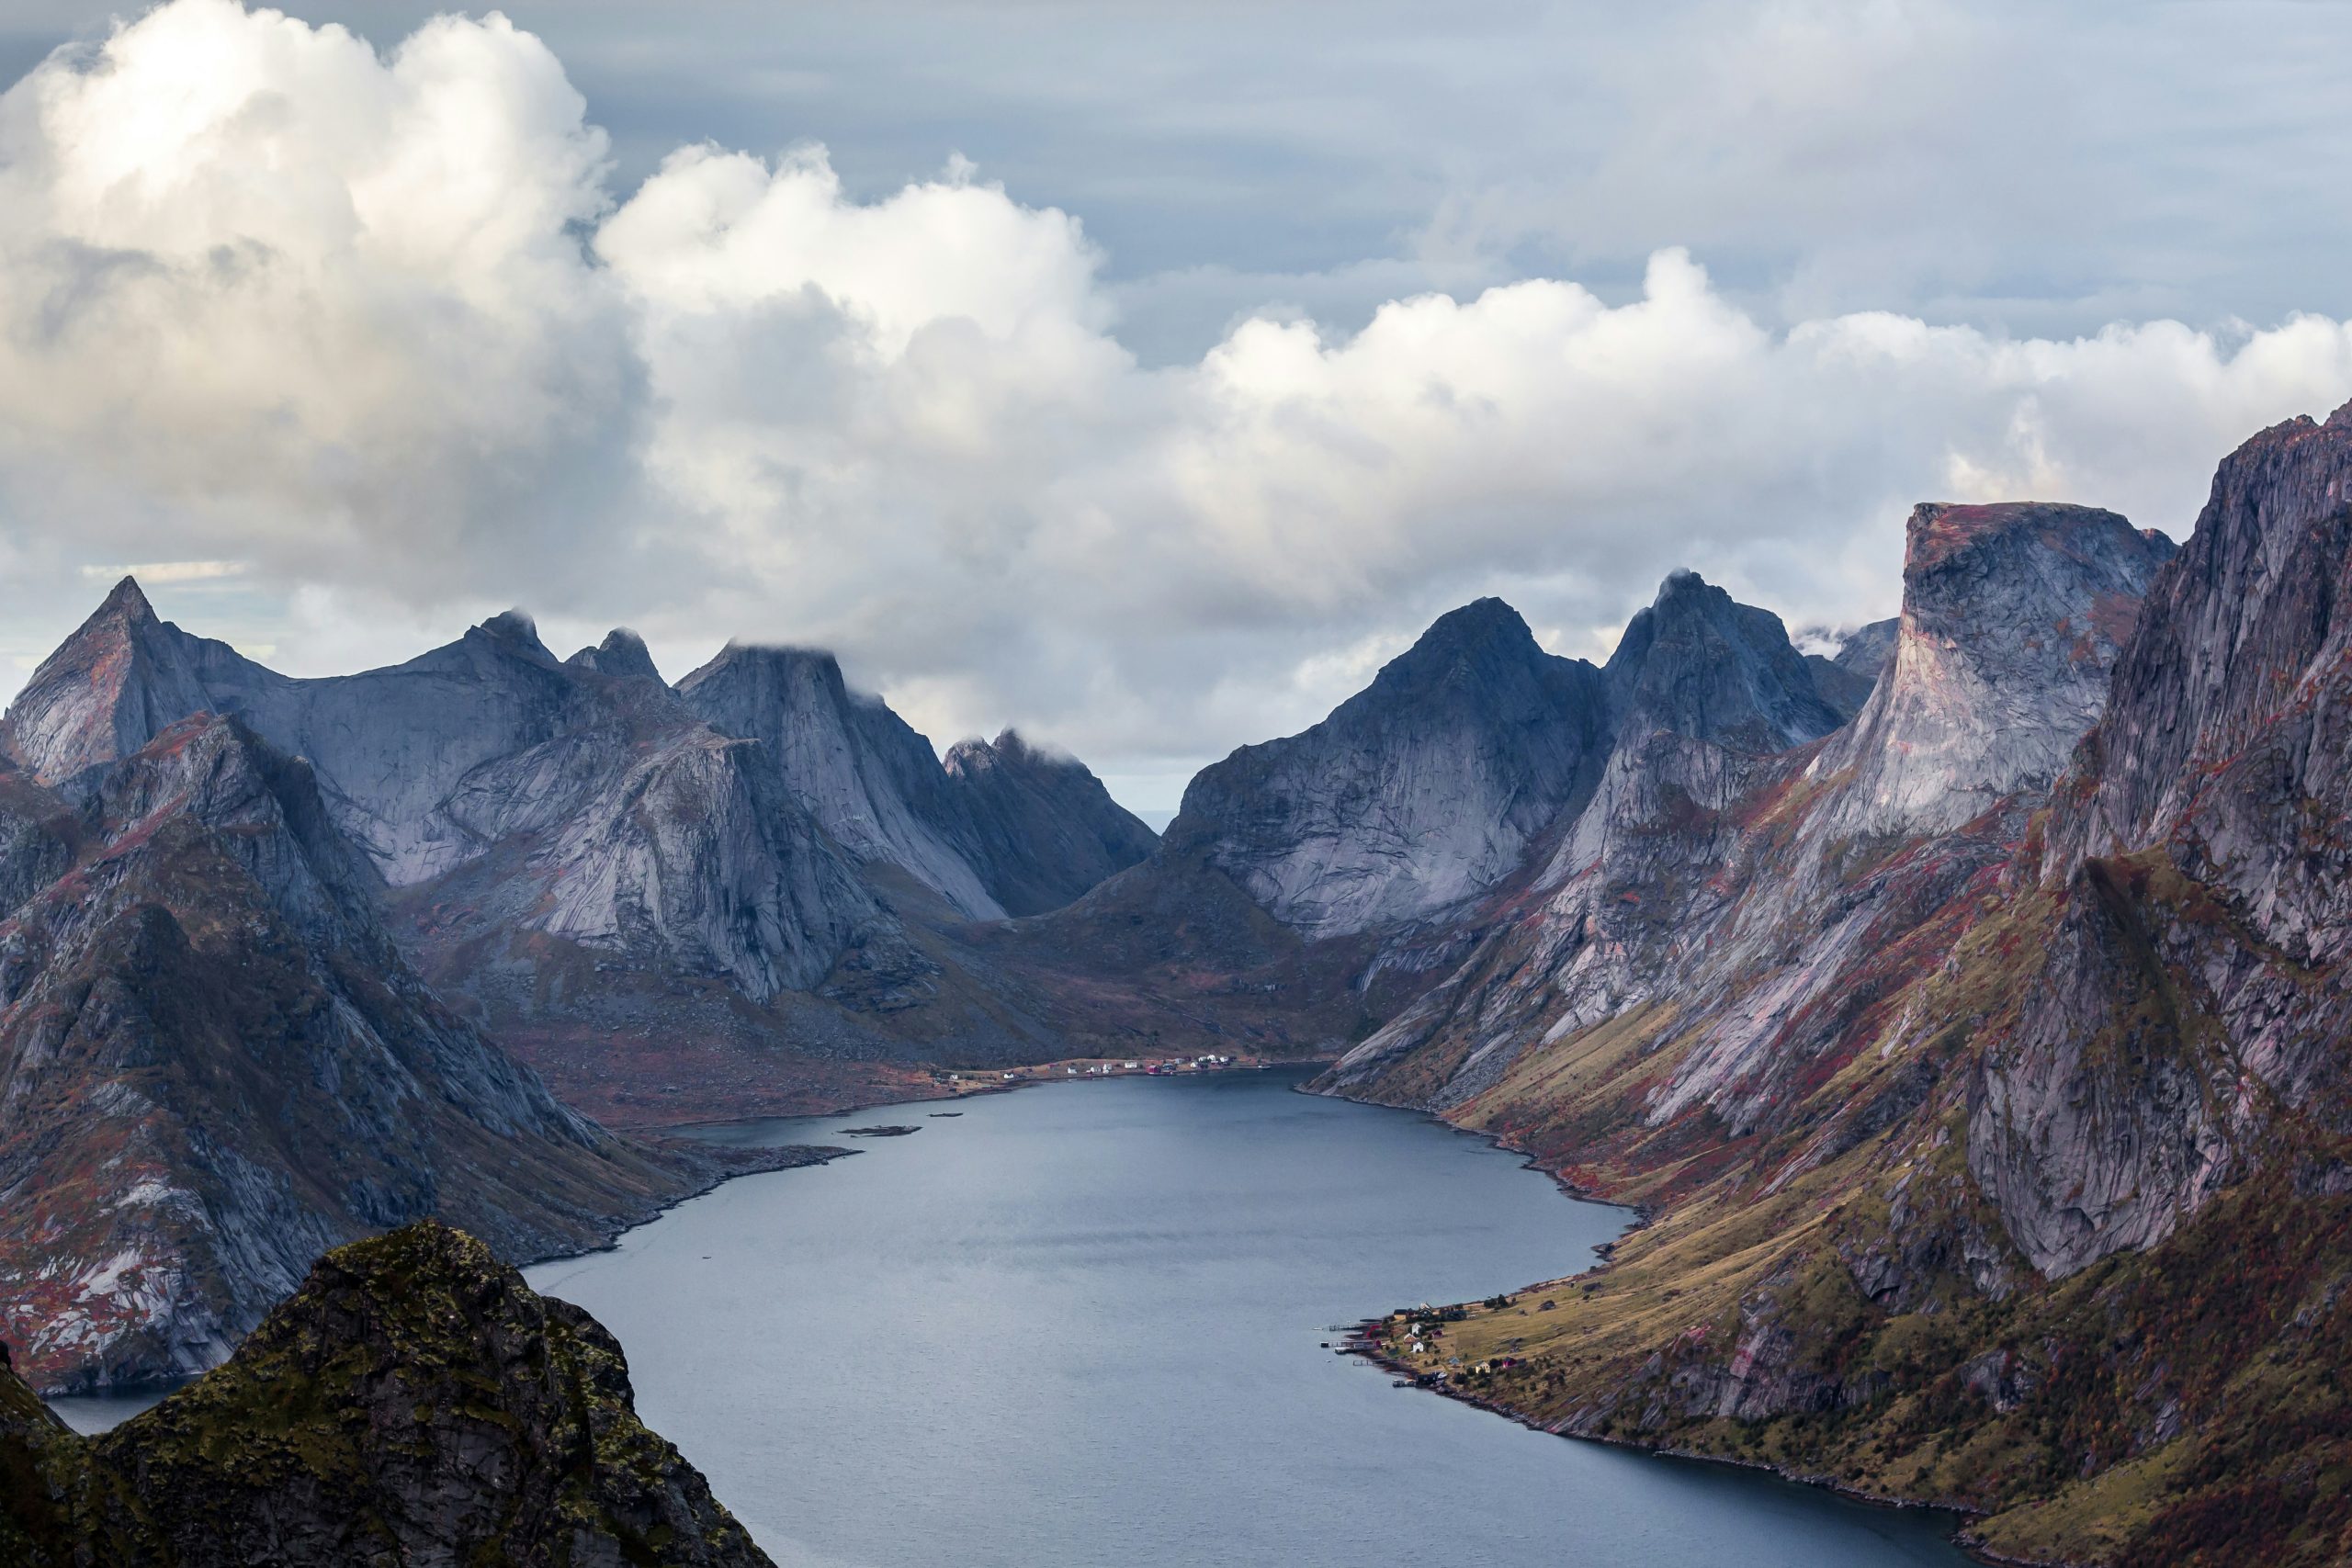 explore the stunning beauty of fjords with our comprehensive guide. learn about the unique landscapes, wildlife, and activities in fjords around the world.